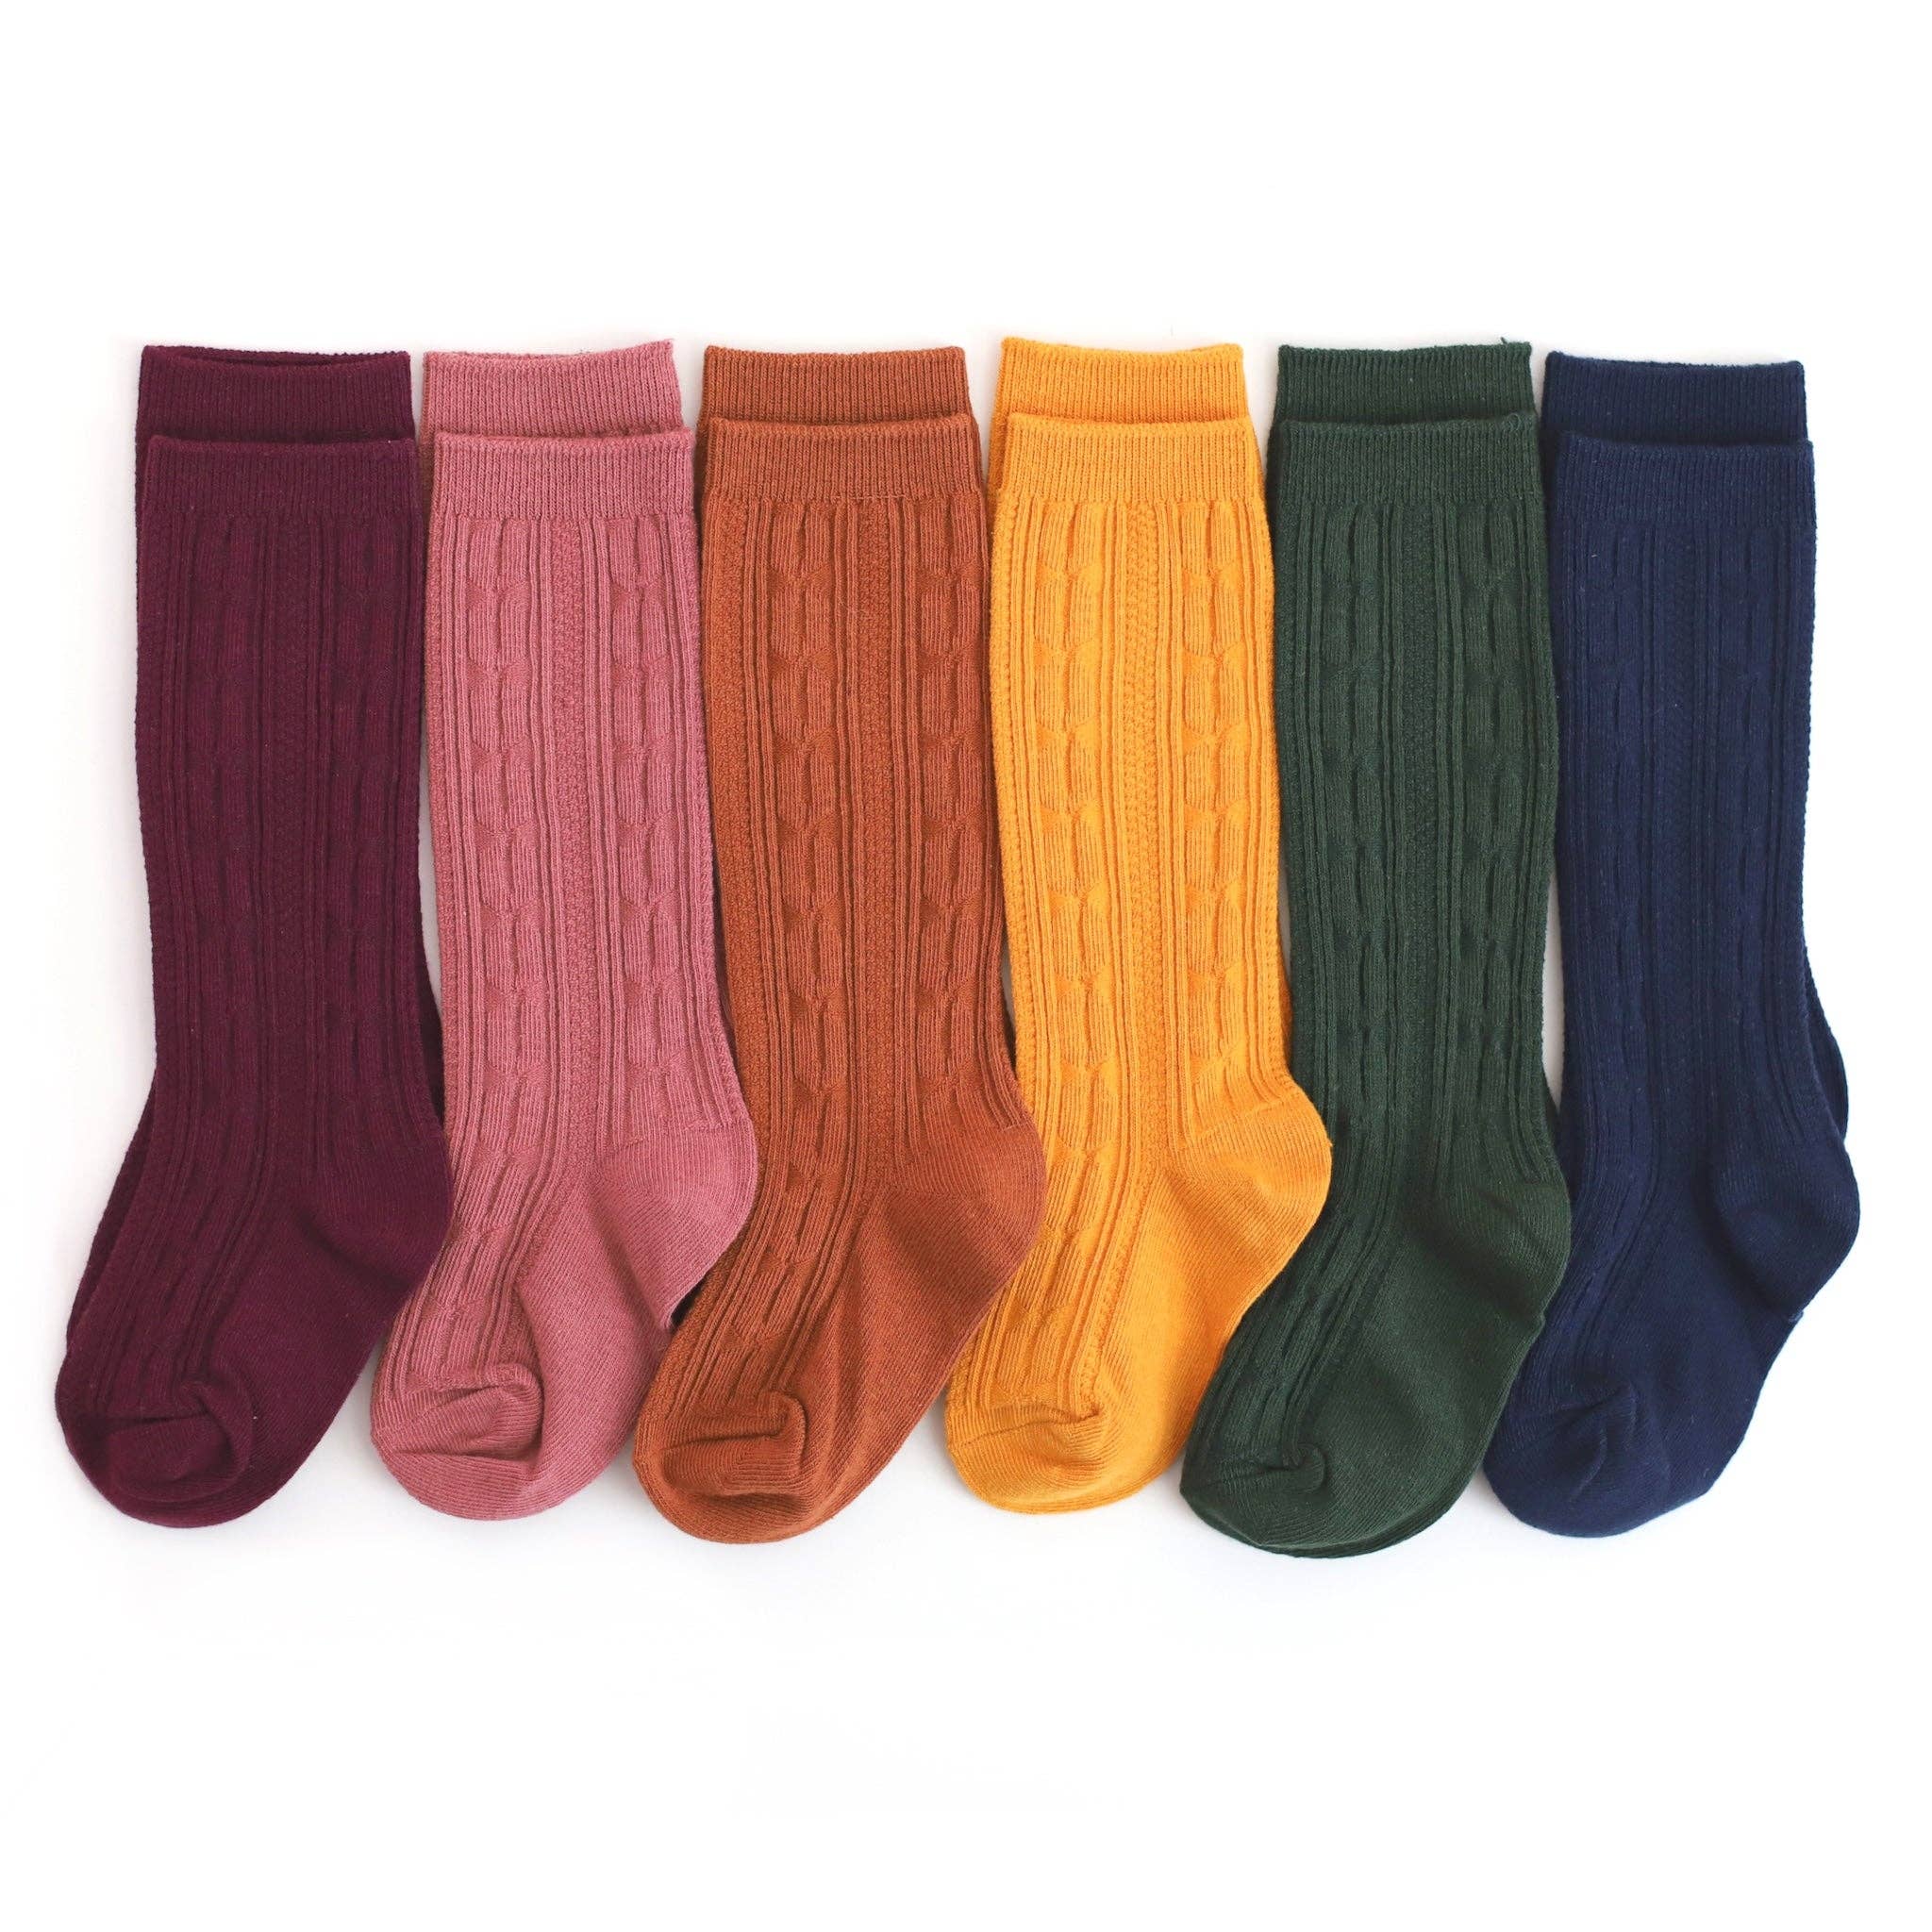 Cable Knit Knee High Socks Bundle - Cabooties